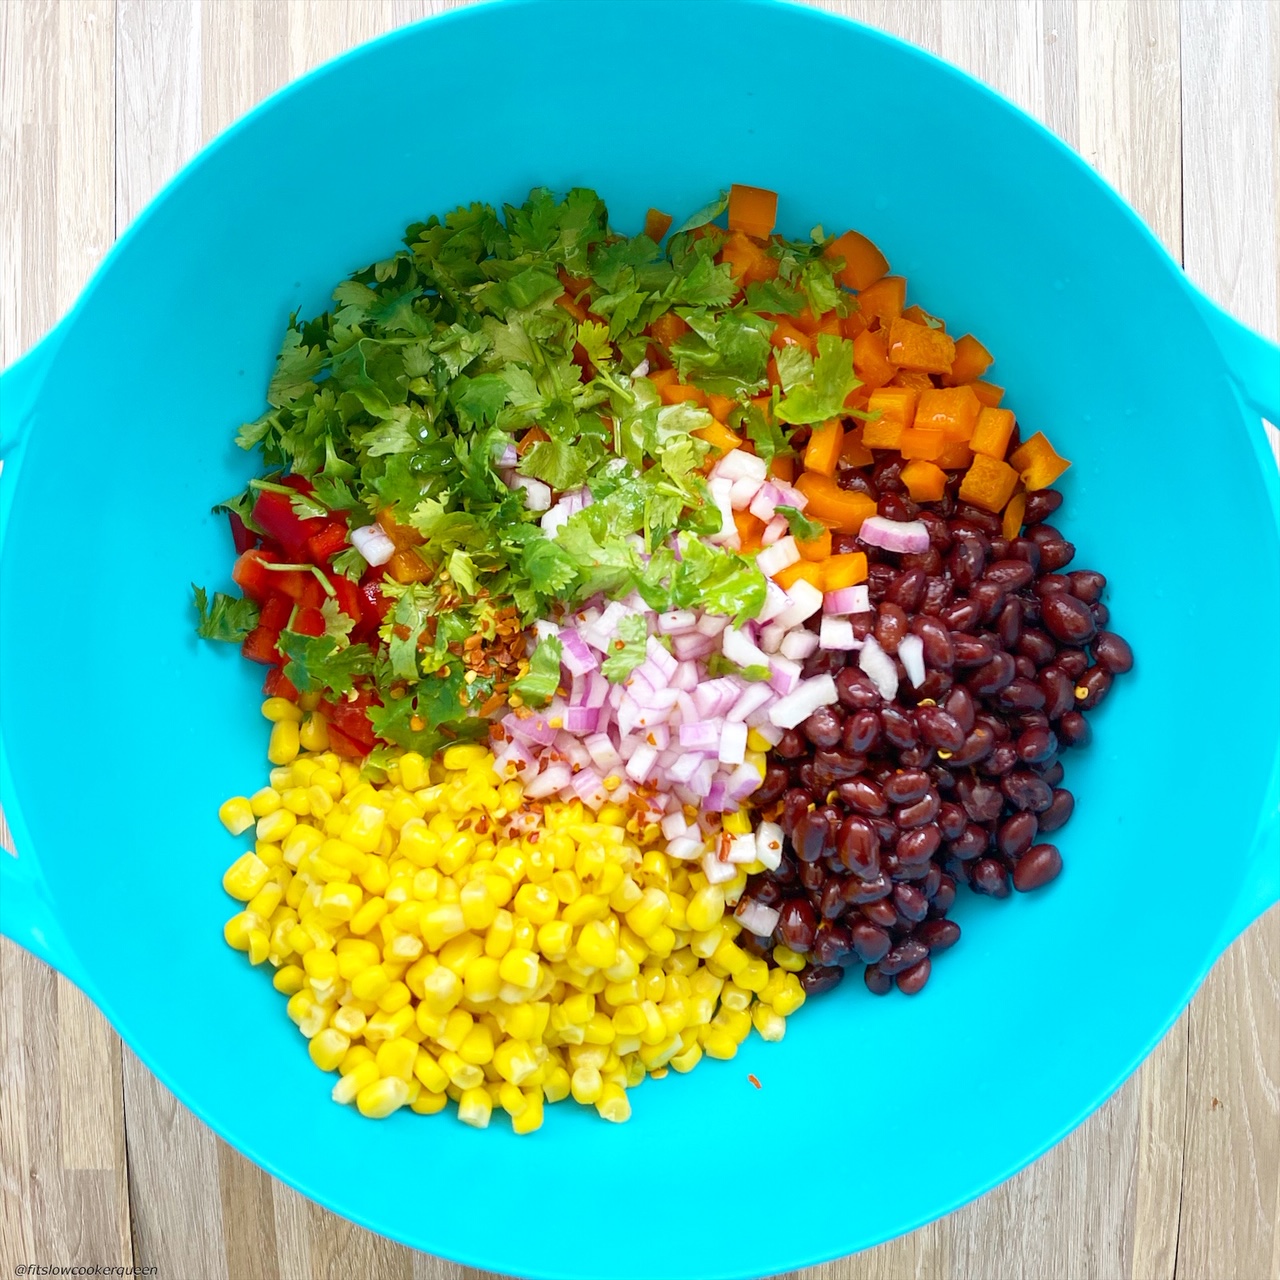 In a large bowl but not mixed together: black beans, corn, diced orange bell pepper, diced red bell pepper, red onion, fresh cilantro